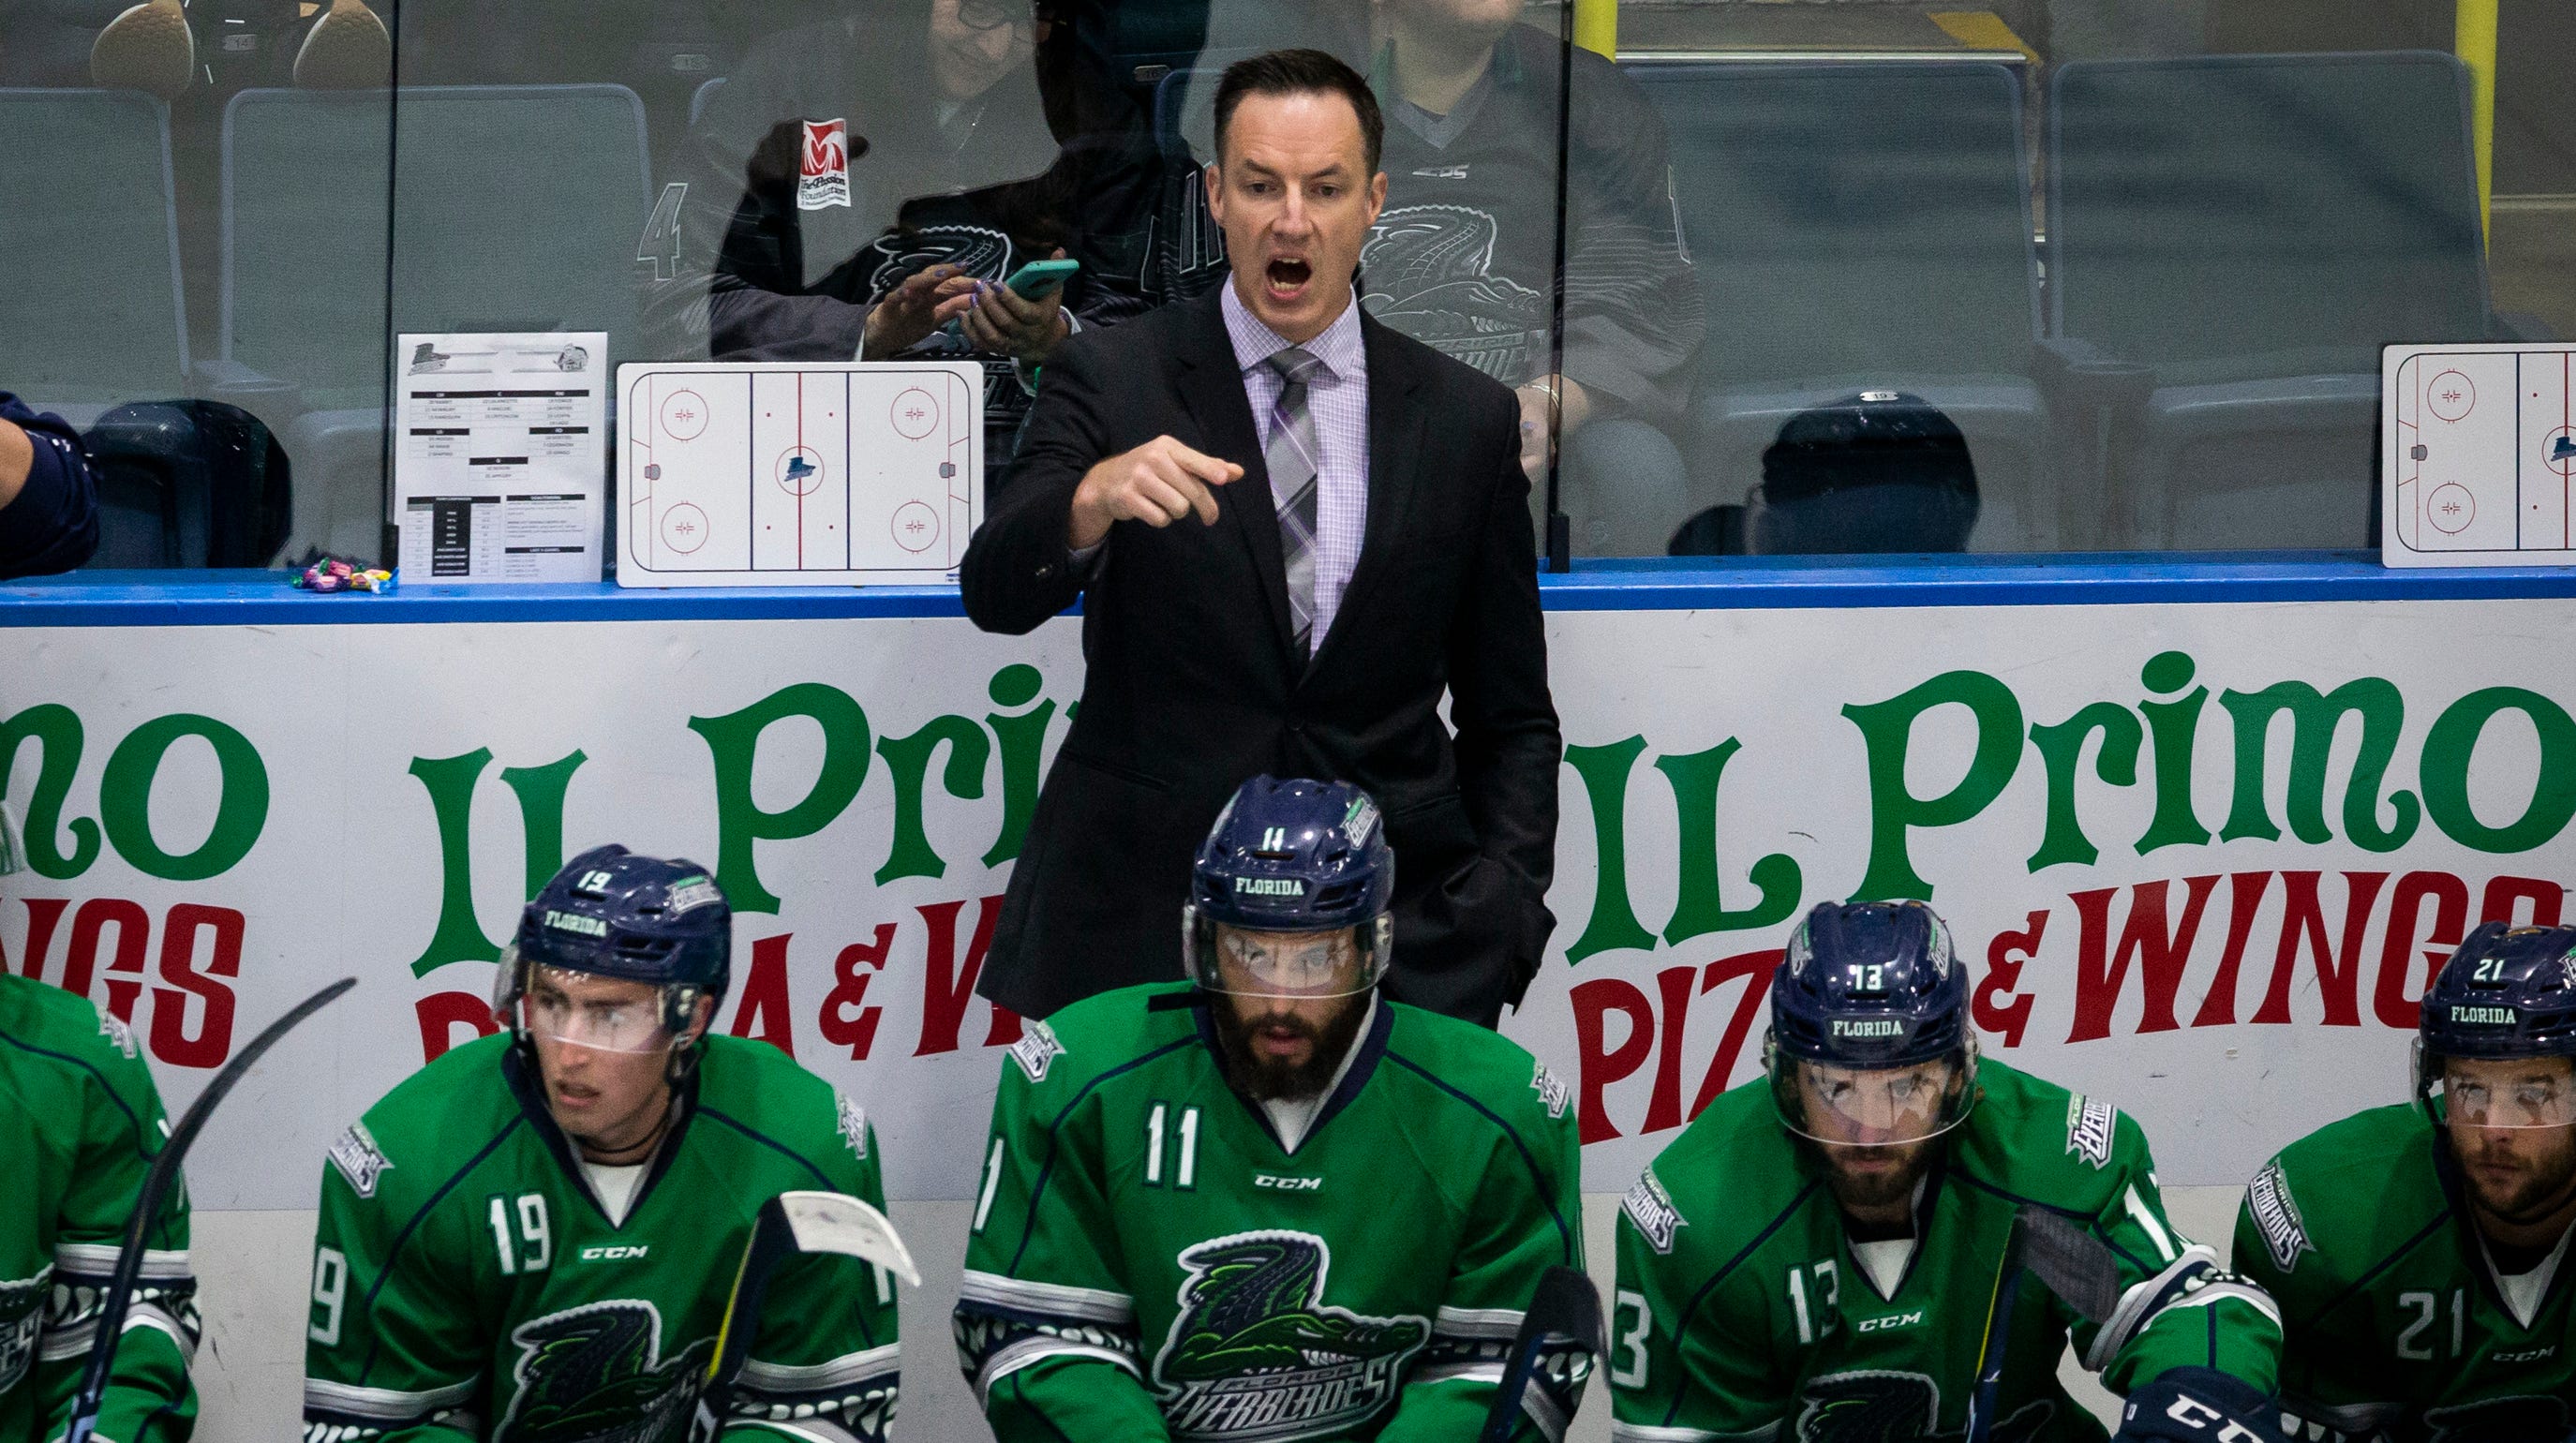 Florida Everblades coach Brad Ralph signs on for 5 more years in ECHL